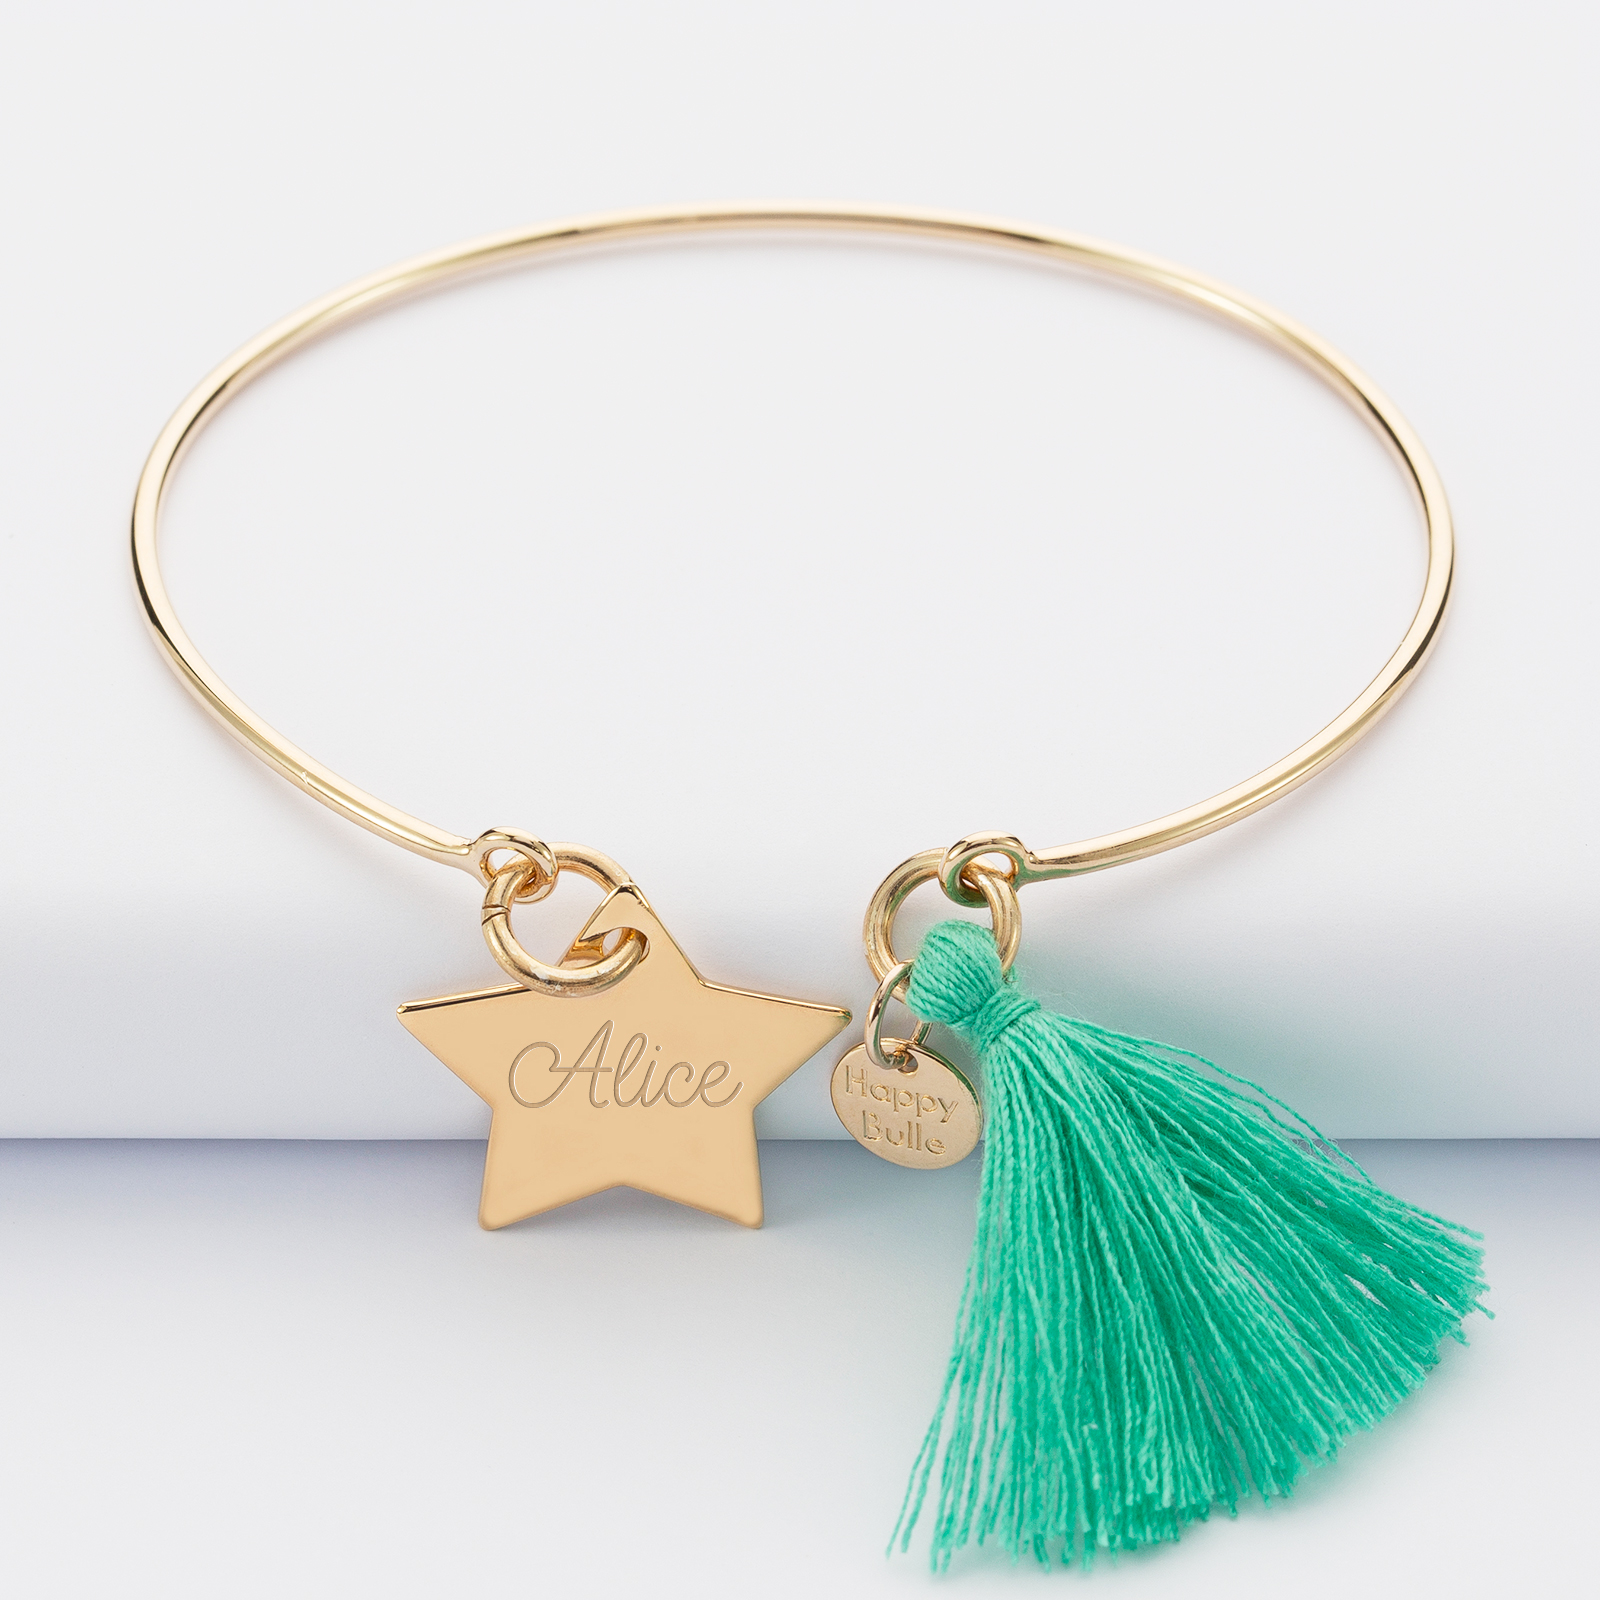 Personalised gold plated bangle with tassel and engraved star medallion 20x20mm name 1